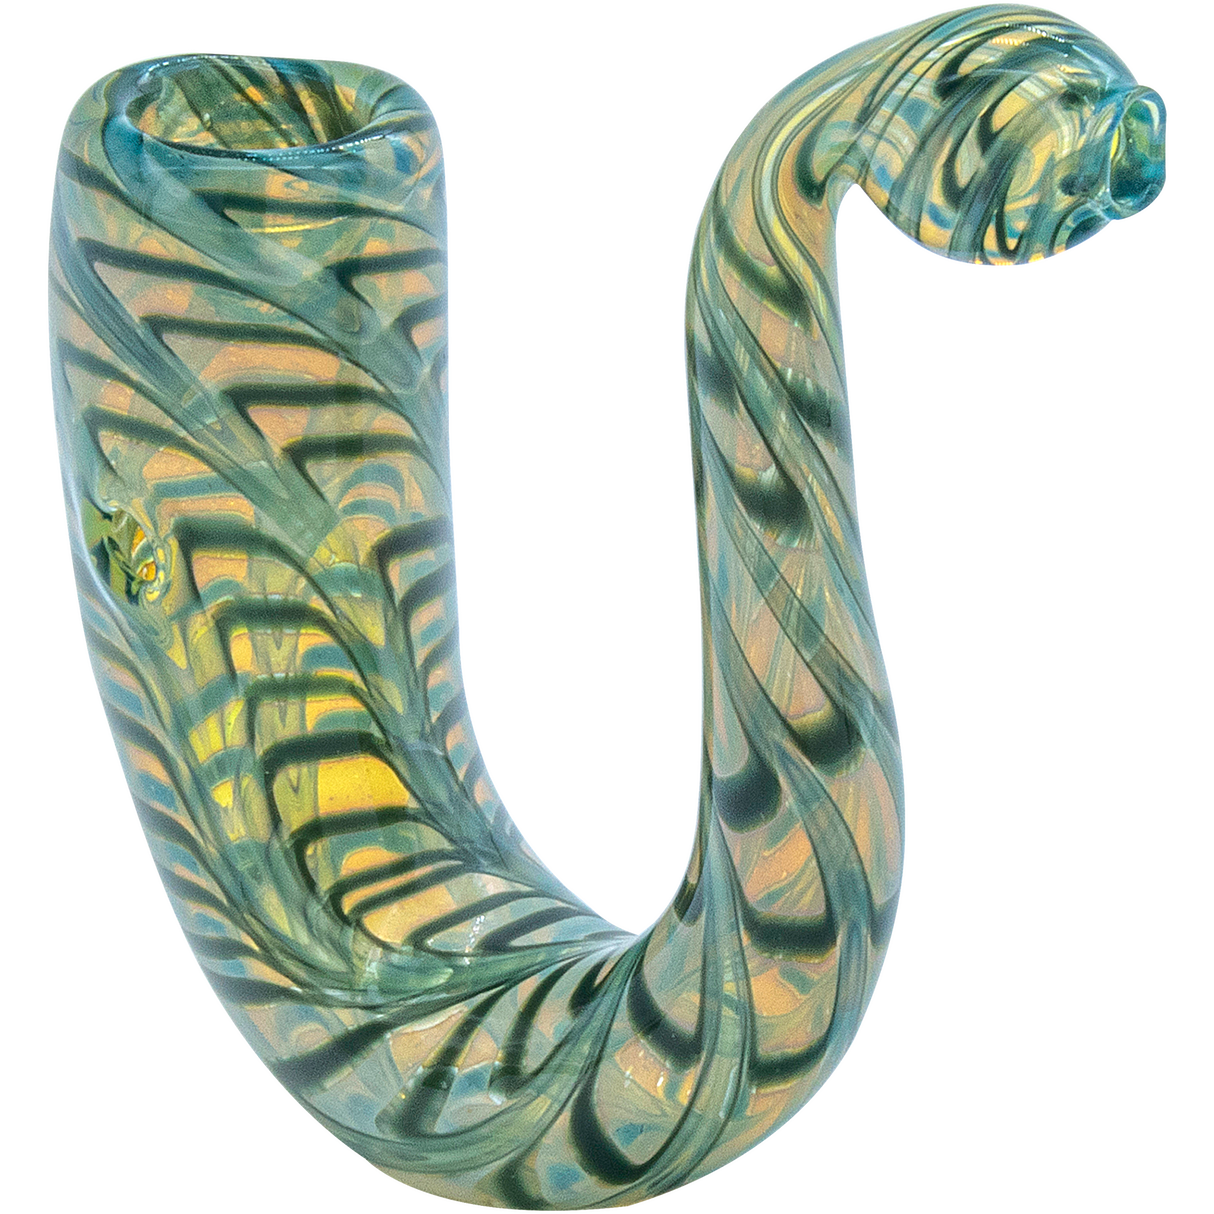 LA Pipes Pocket Sherlock Pipe in Teal with Fumed Color Changing Design, Front View